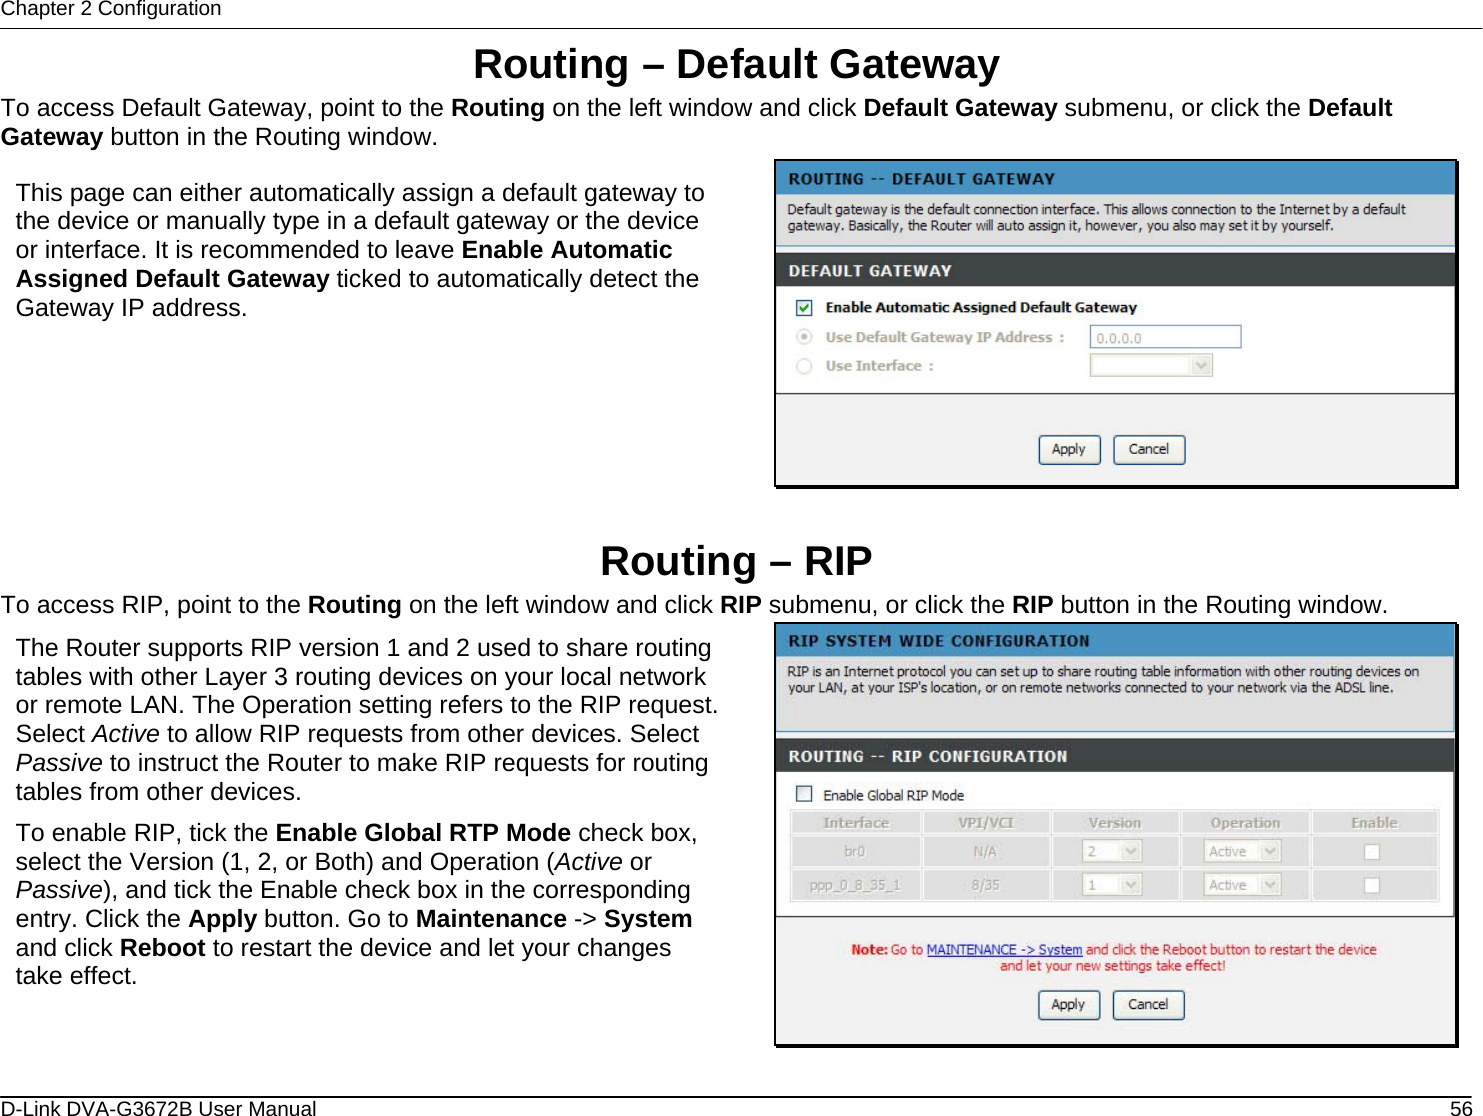 Chapter 2 Configuration Routing – Default Gateway To access Default Gateway, point to the Routing on the left window and click Default Gateway submenu, or click the Default Gateway button in the Routing window.  This page can either automatically assign a default gateway to the device or manually type in a default gateway or the device or interface. It is recommended to leave Enable Automatic Assigned Default Gateway ticked to automatically detect the Gateway IP address.  Routing – RIP To access RIP, point to the Routing on the left window and click RIP submenu, or click the RIP button in the Routing window.  The Router supports RIP version 1 and 2 used to share routing tables with other Layer 3 routing devices on your local network or remote LAN. The Operation setting refers to the RIP request. Select Active to allow RIP requests from other devices. Select Passive to instruct the Router to make RIP requests for routing tables from other devices.  To enable RIP, tick the Enable Global RTP Mode check box, select the Version (1, 2, or Both) and Operation (Active or Passive), and tick the Enable check box in the corresponding entry. Click the Apply button. Go to Maintenance -&gt; System and click Reboot to restart the device and let your changes take effect.   D-Link DVA-G3672B User Manual  56